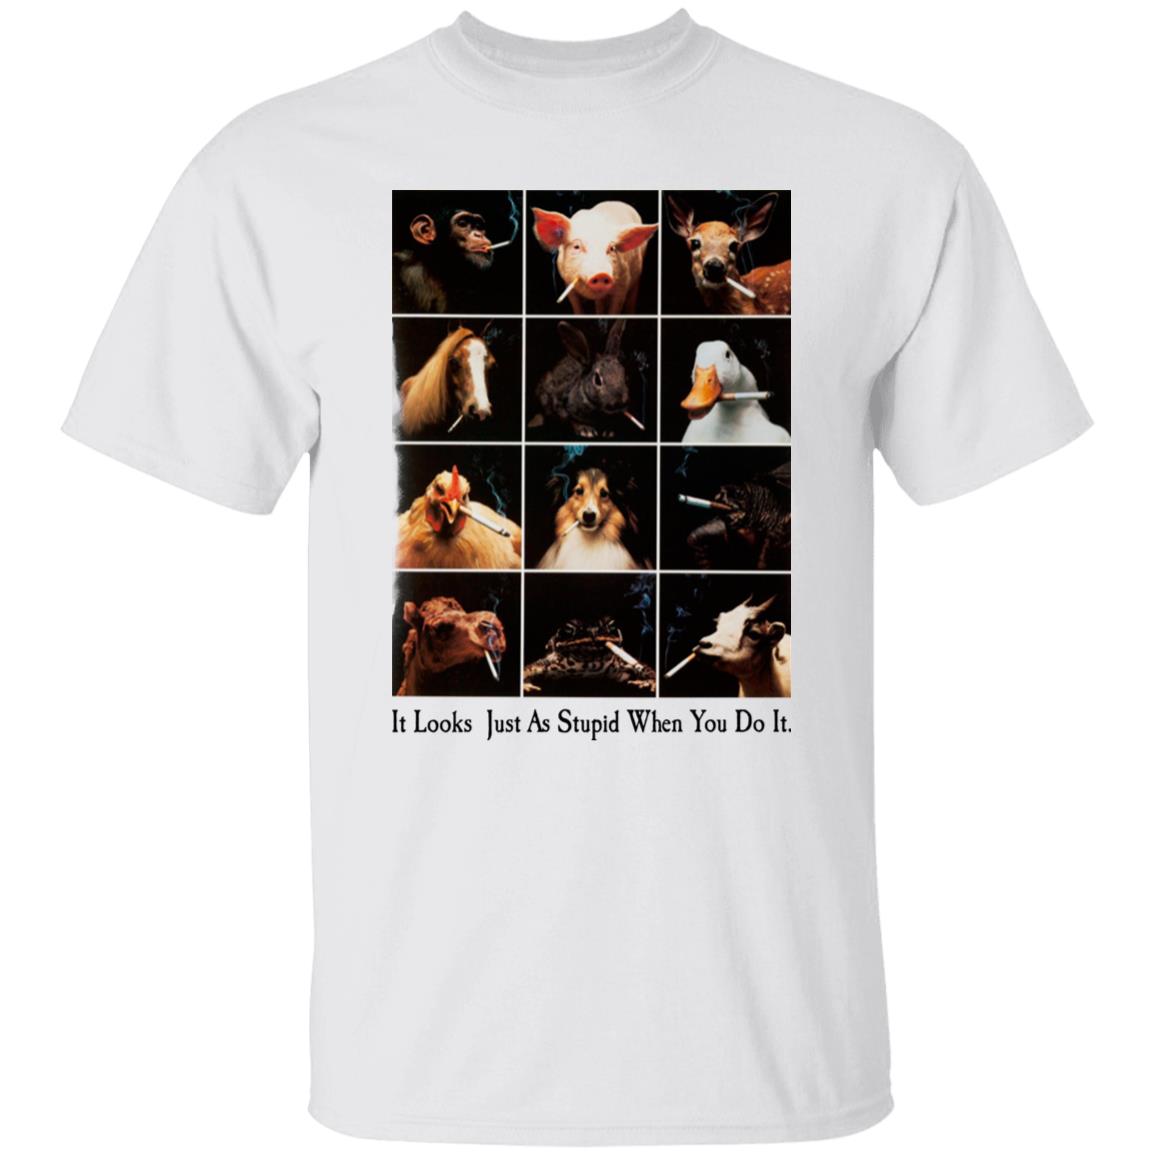 It Looks Just As Stupid When You Do It Shirt Youth Against Tobacco Houellebecq_2  Rob